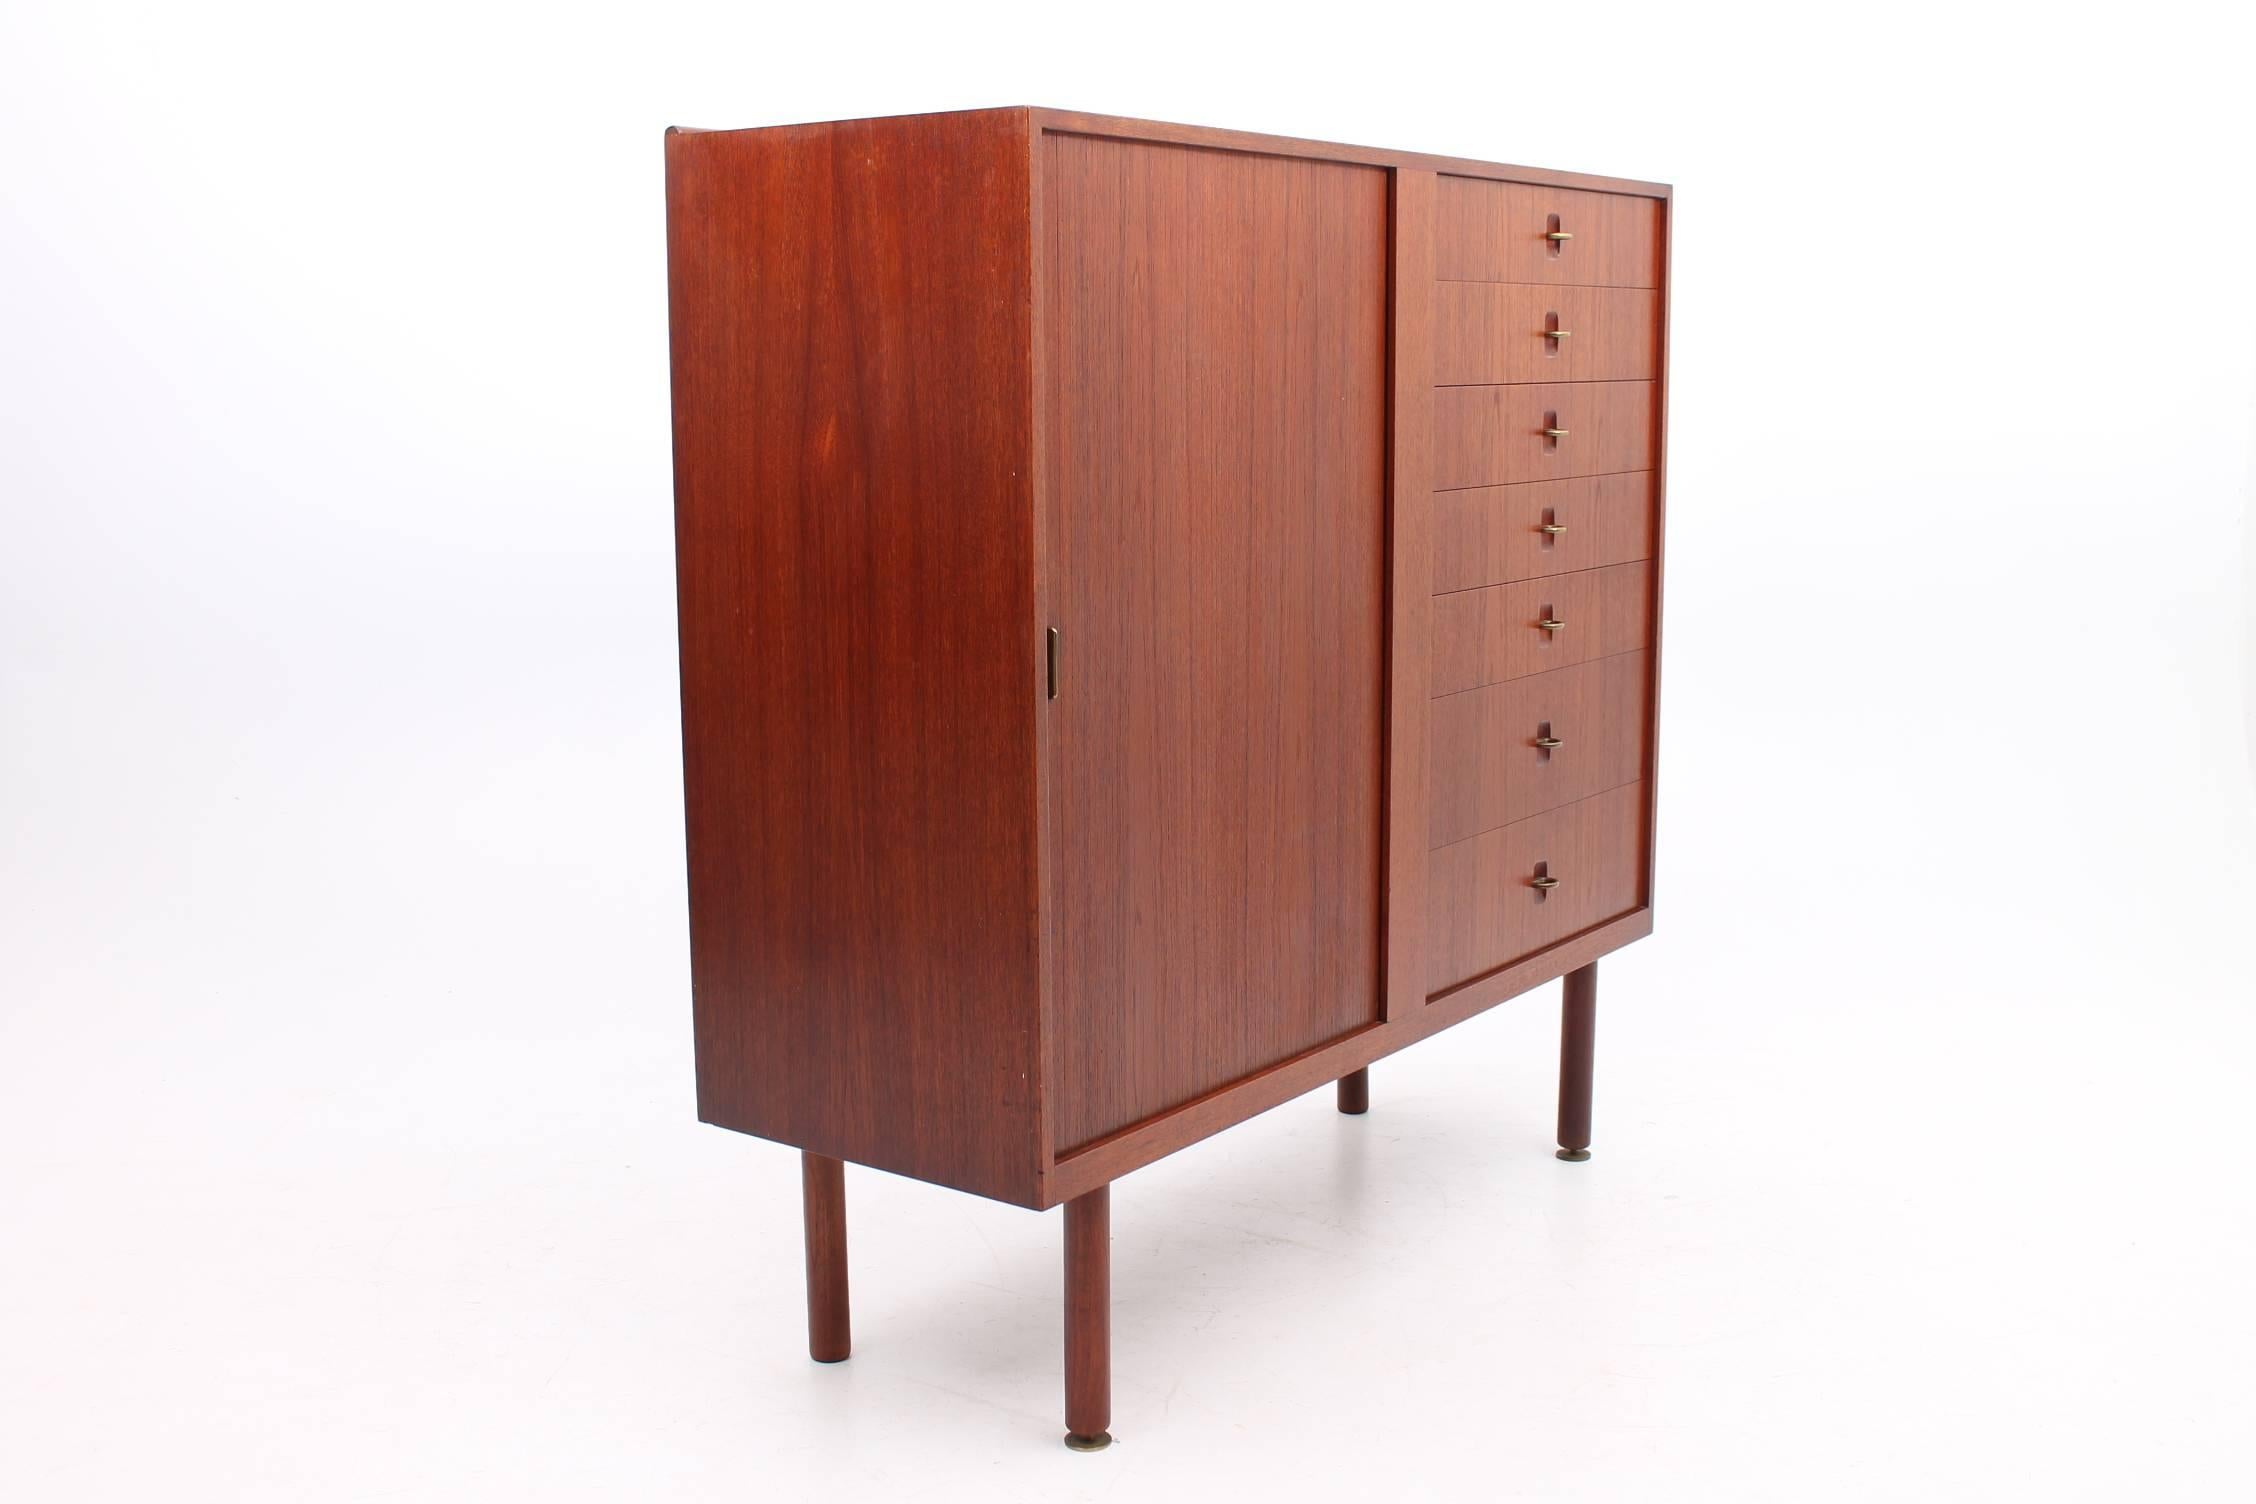 Beautiful cabinet made of teak by Aksel Bender Madsen for Ejnar Larsen. The details on this cabinet truly set it apart from the rest. The left half of the cabinet features a roll front tambour door with a brass handle and two adjustable shelves on